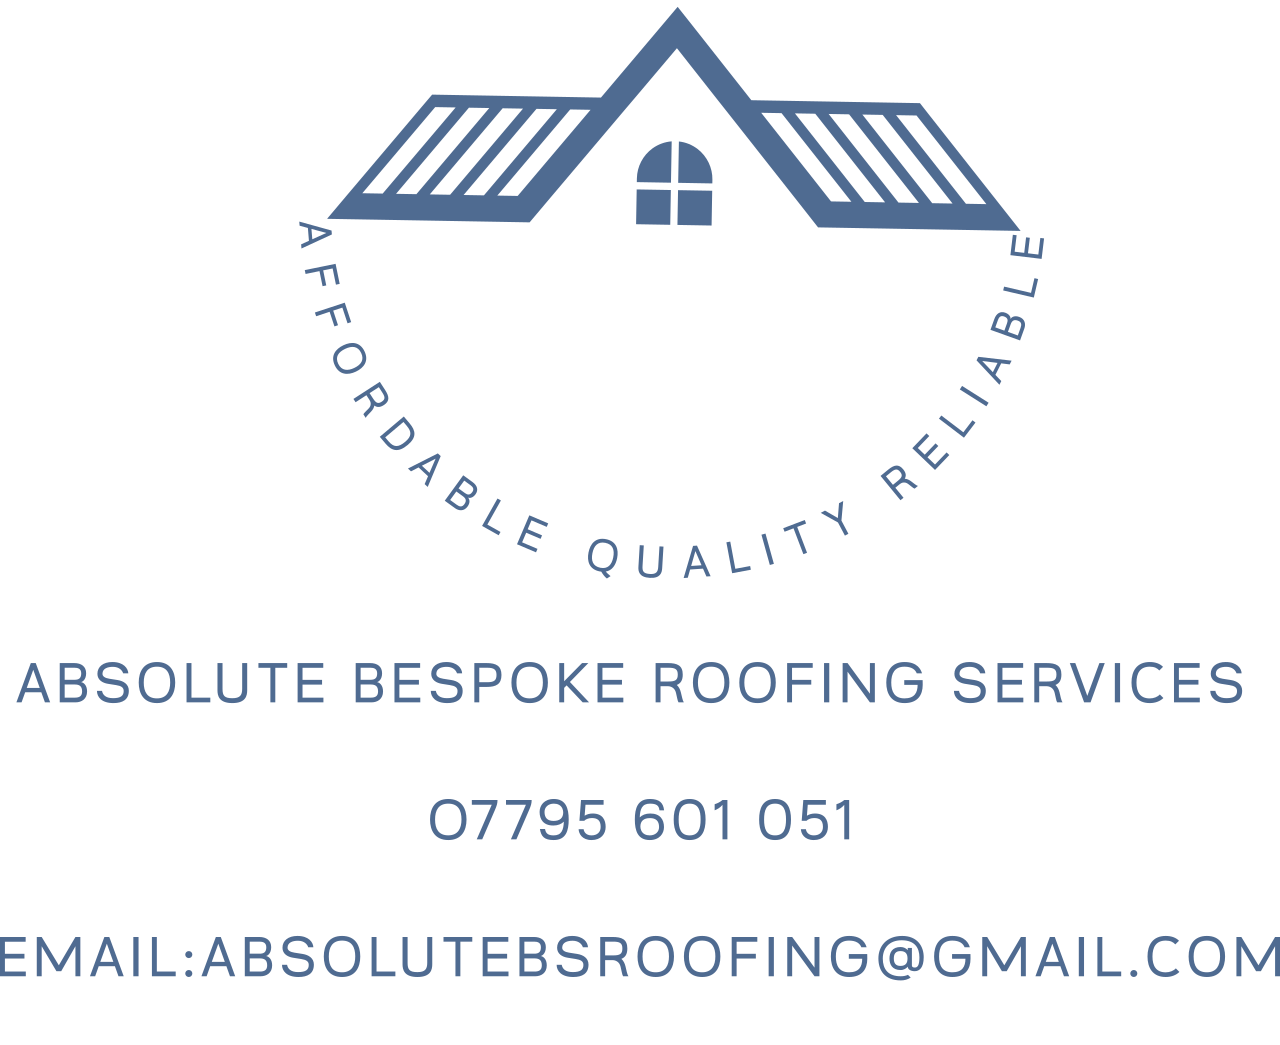 Absolute bespoke roofing services 

O7795 601 051

Email:Absolutebsroofing@gmail.com
's logo